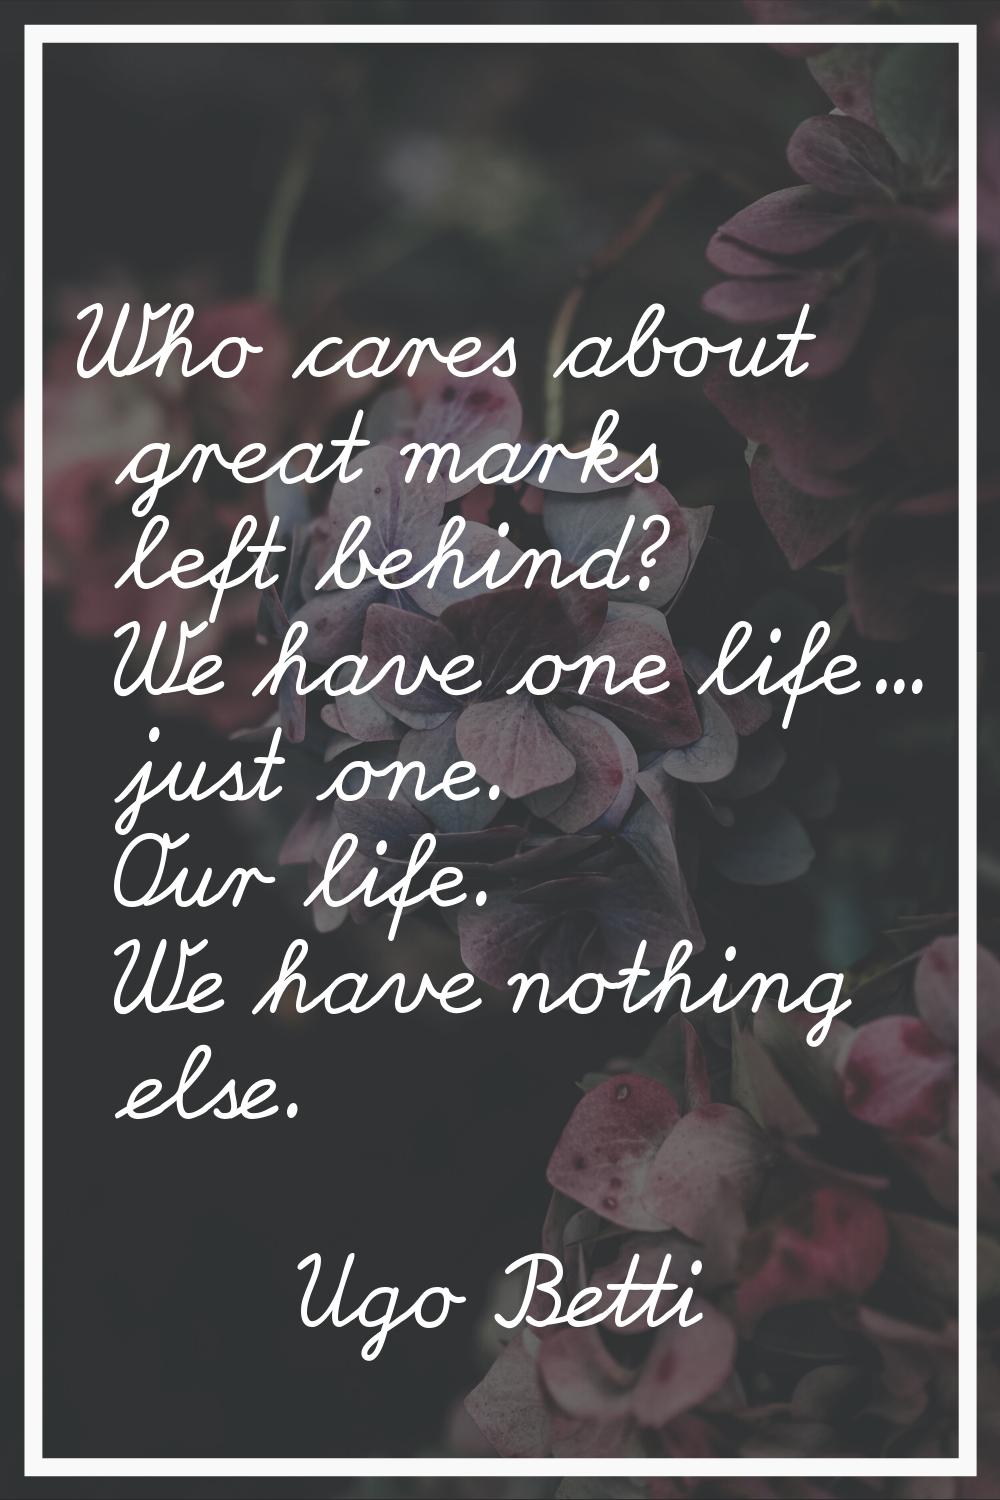 Who cares about great marks left behind? We have one life... just one. Our life. We have nothing el